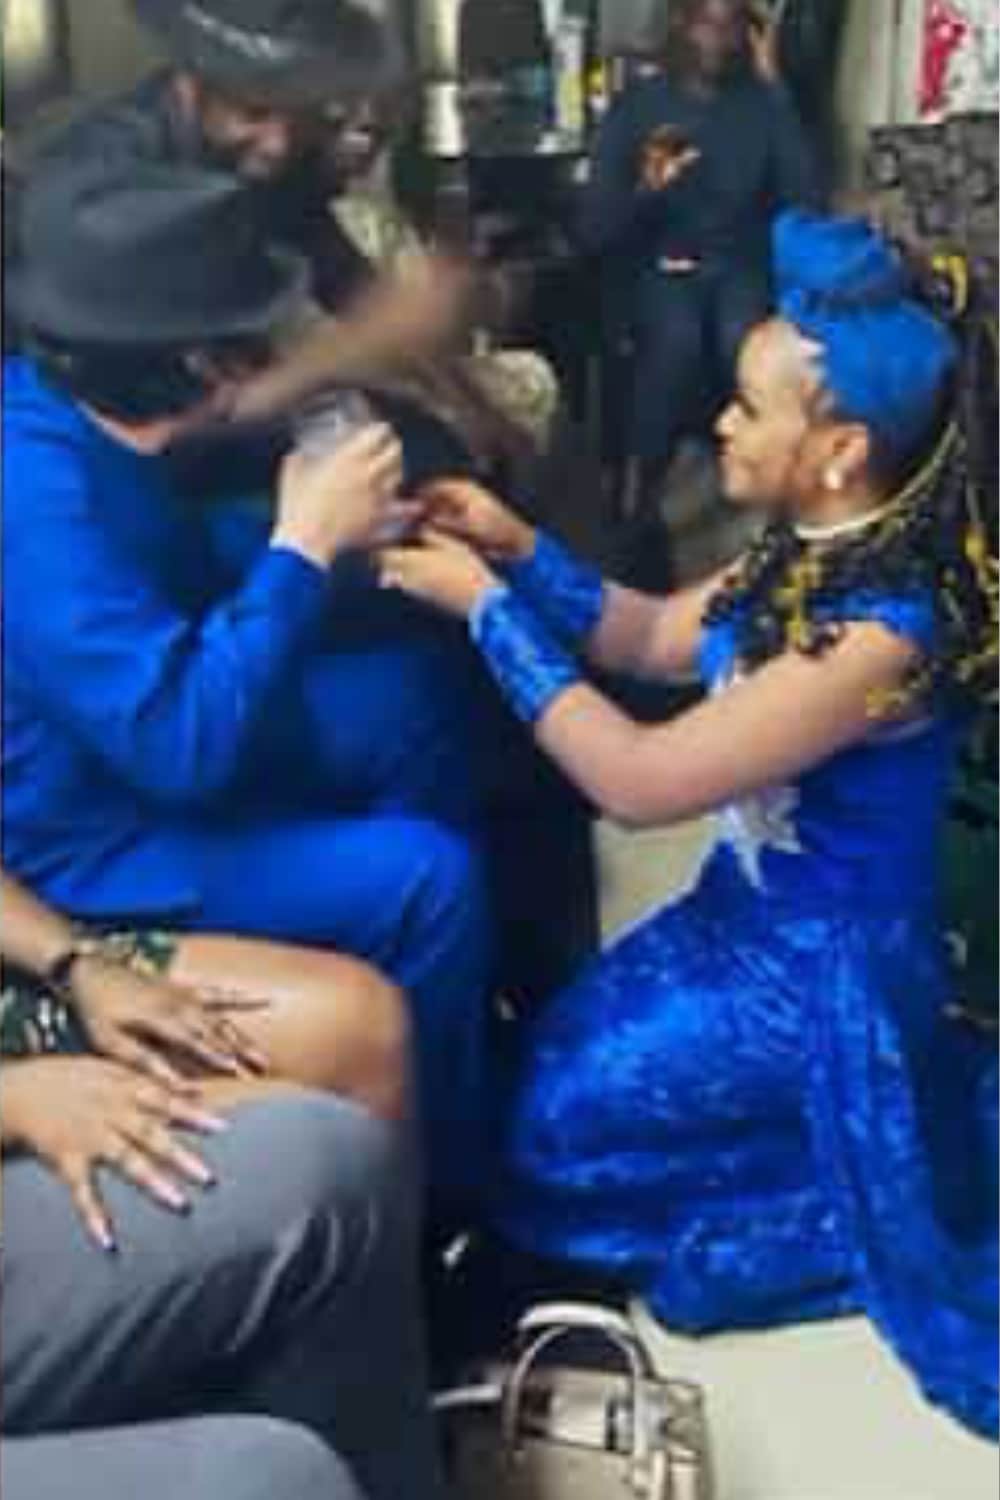 "Finally we made it" - After one year of chatting online, American man flies into Nigeria, marries young lady (Video)